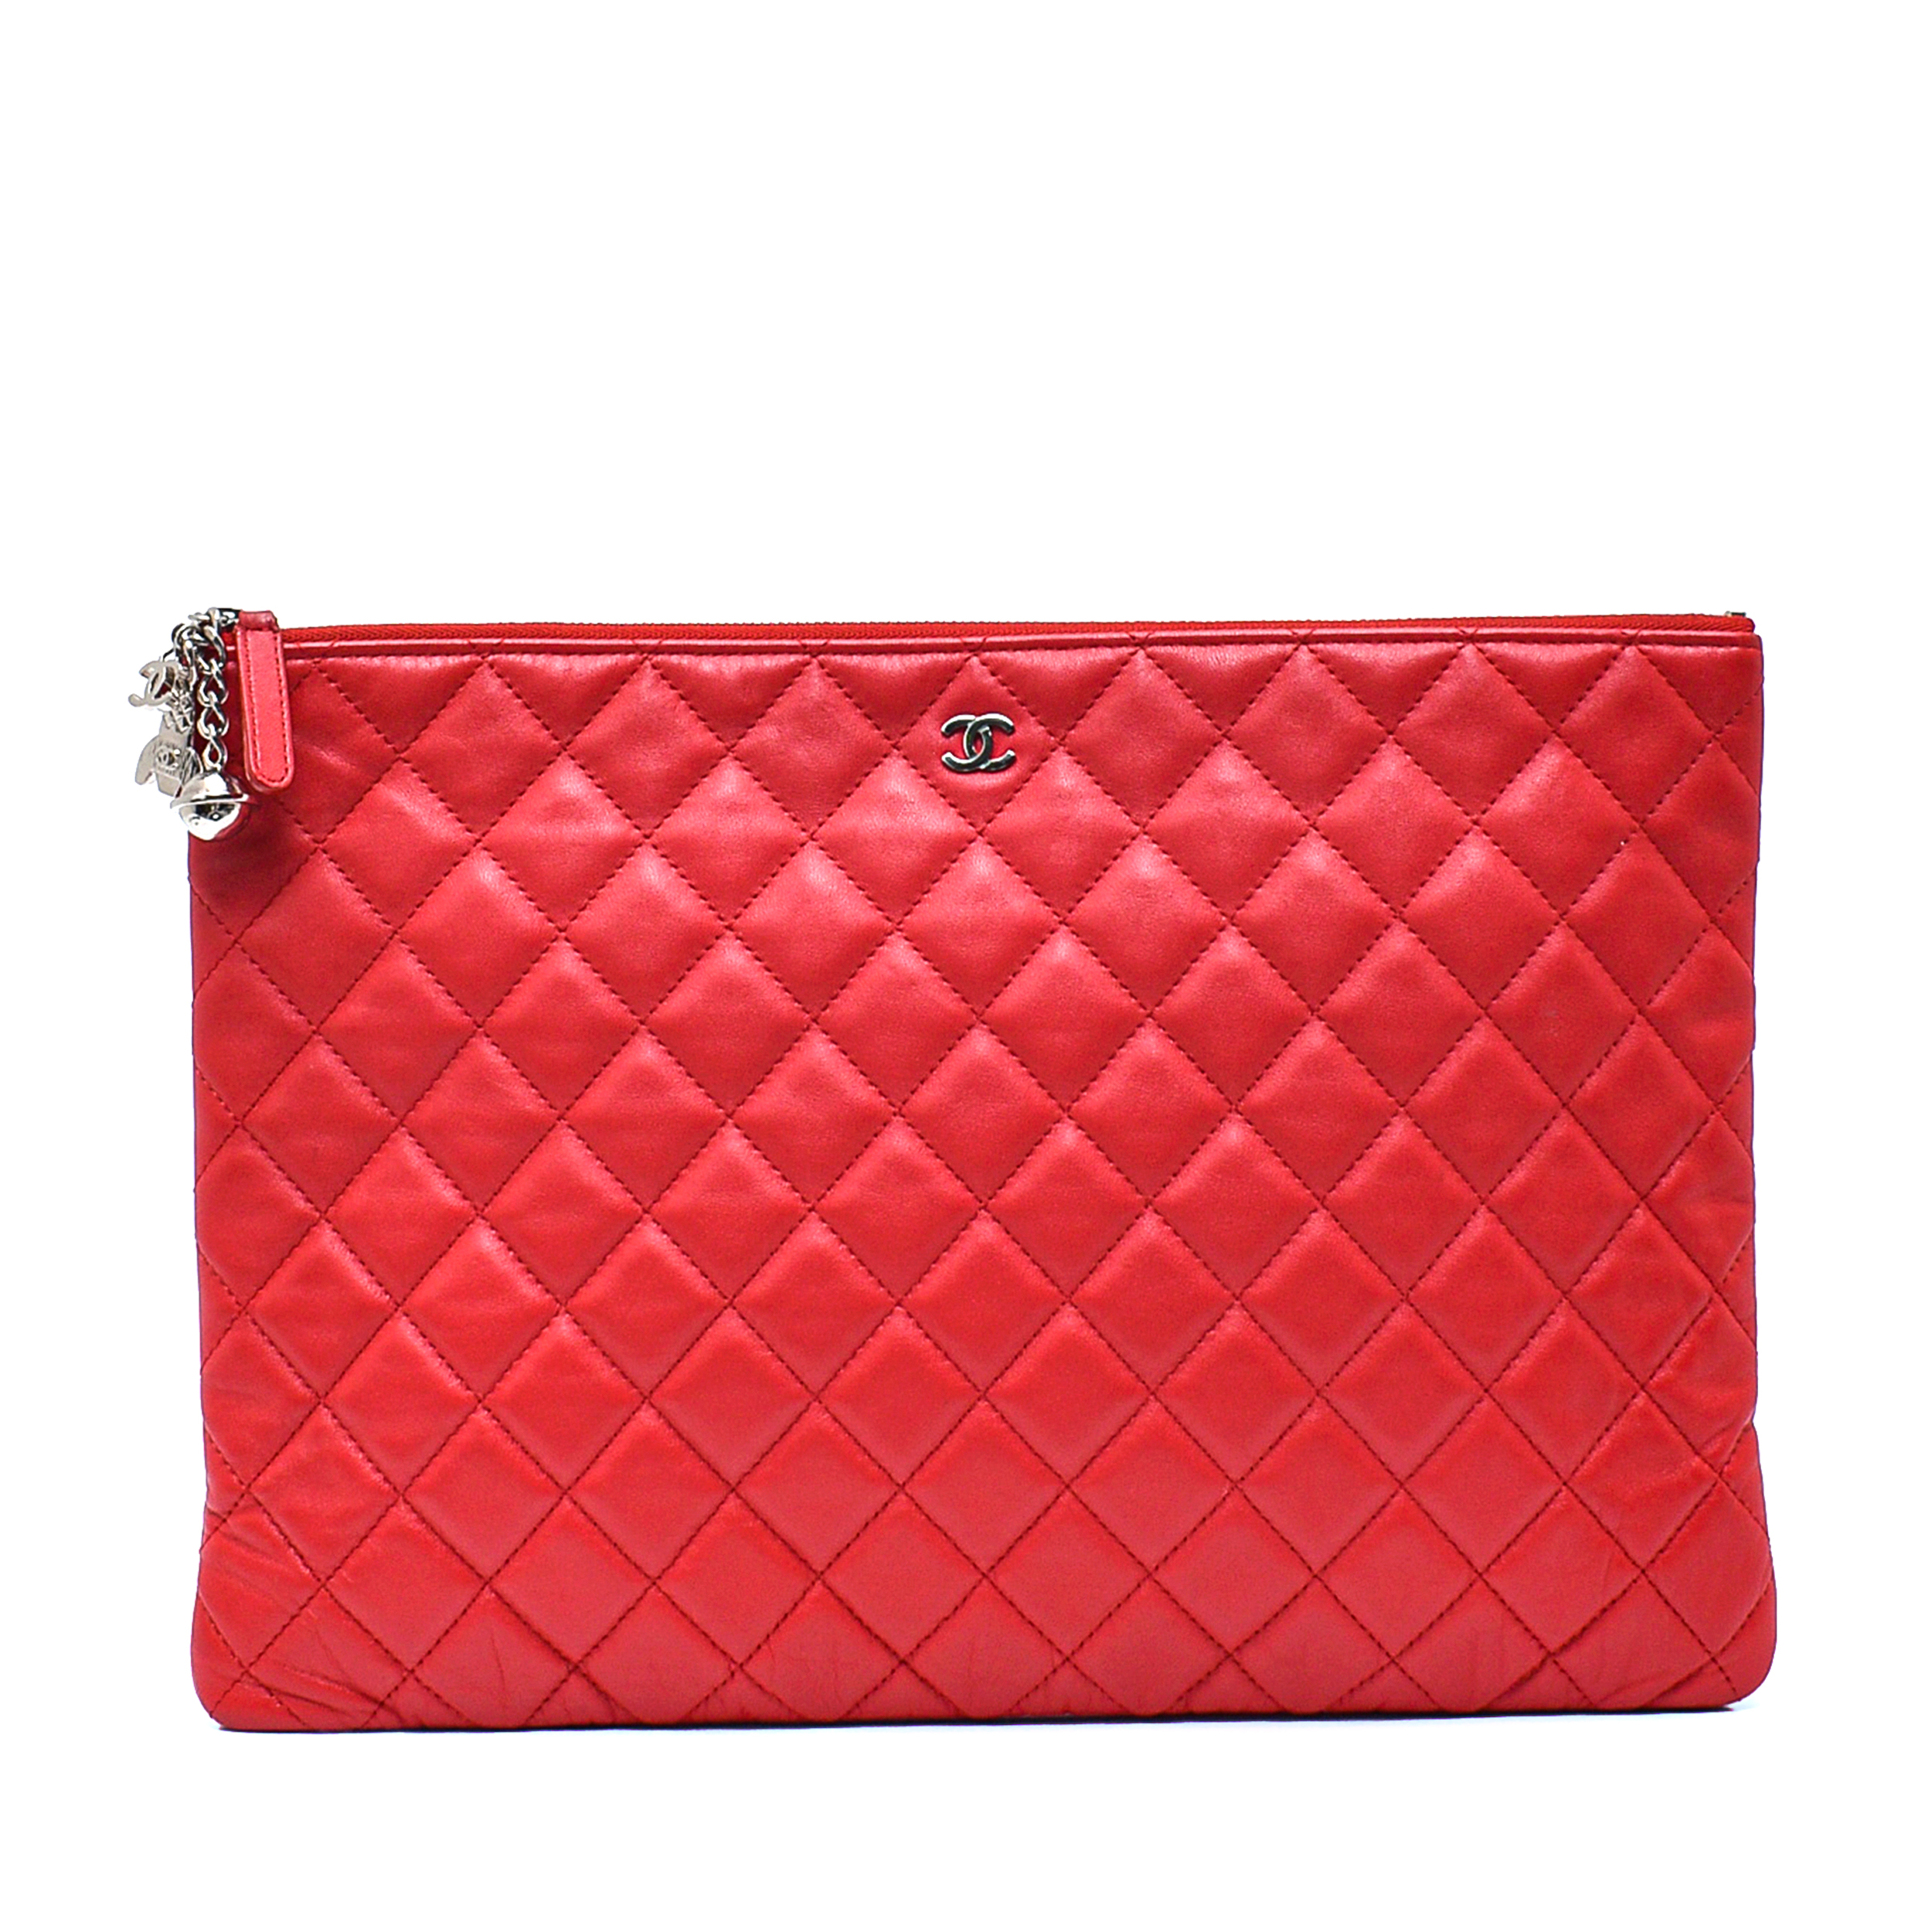 Chanel - Red Quilted Lambskin Leather O Case Large Clutch Bag